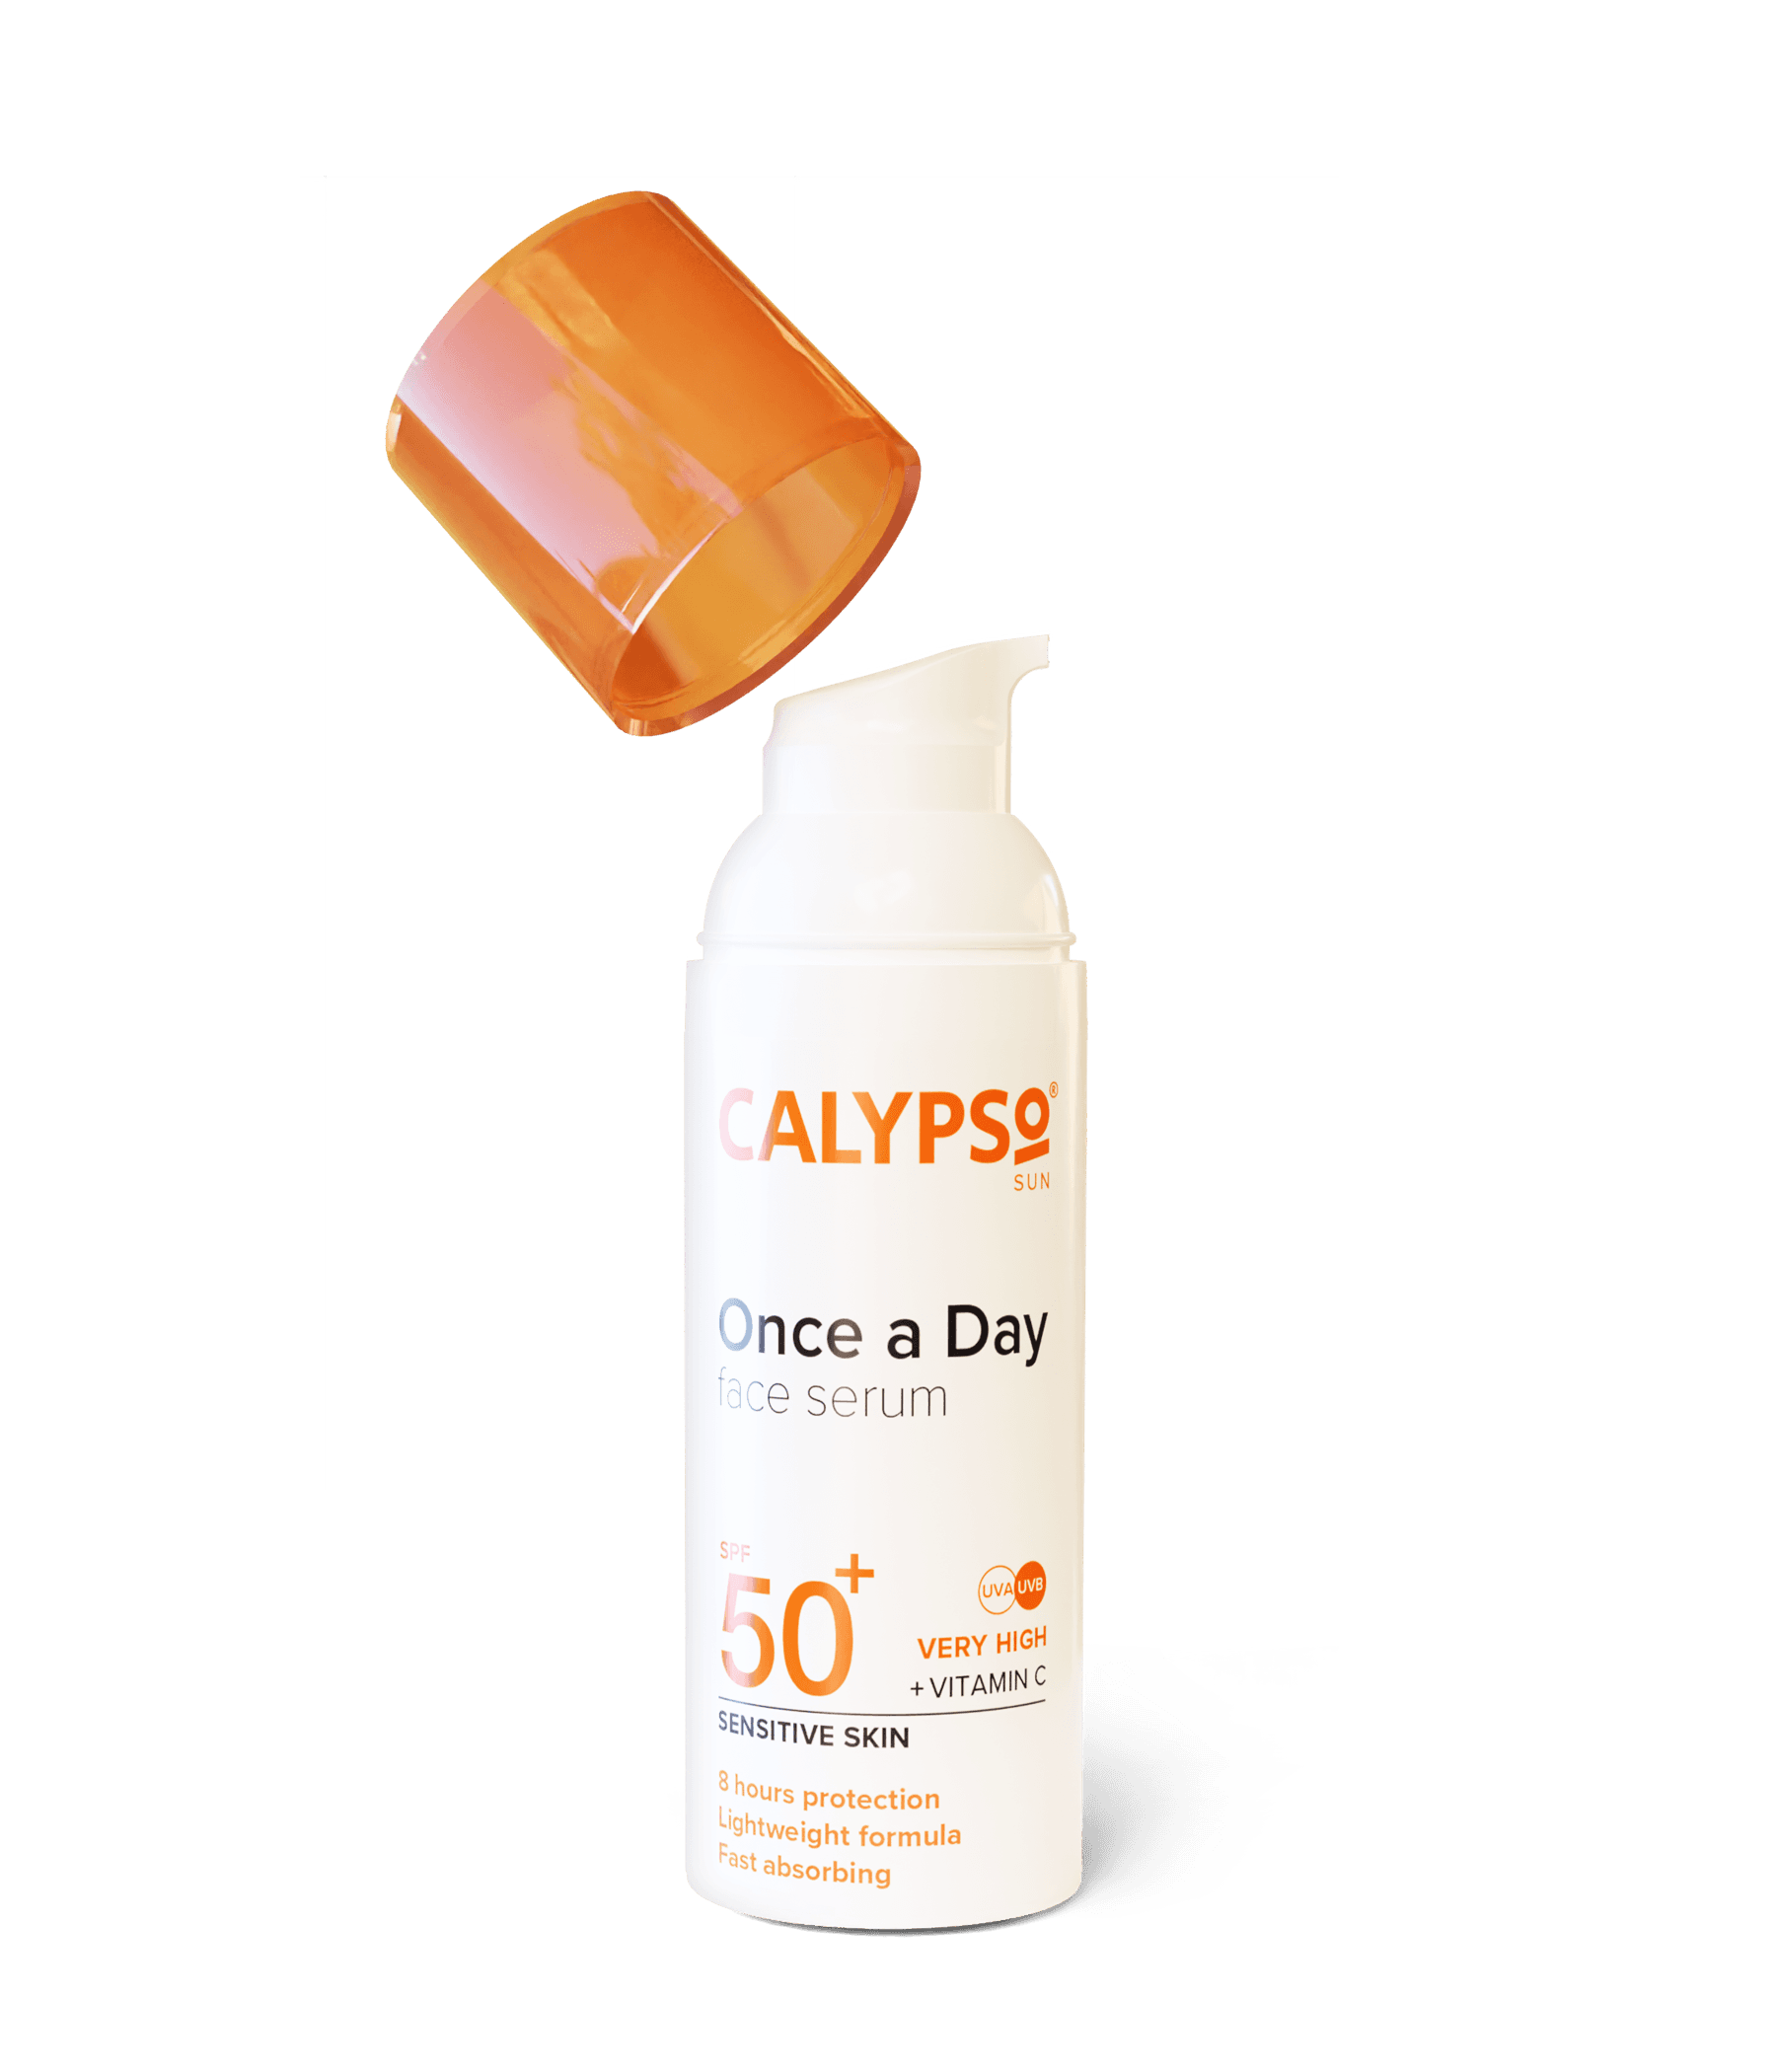 Calypso Once a Day Serum SPF50+ with vitamin c, bottle no cap